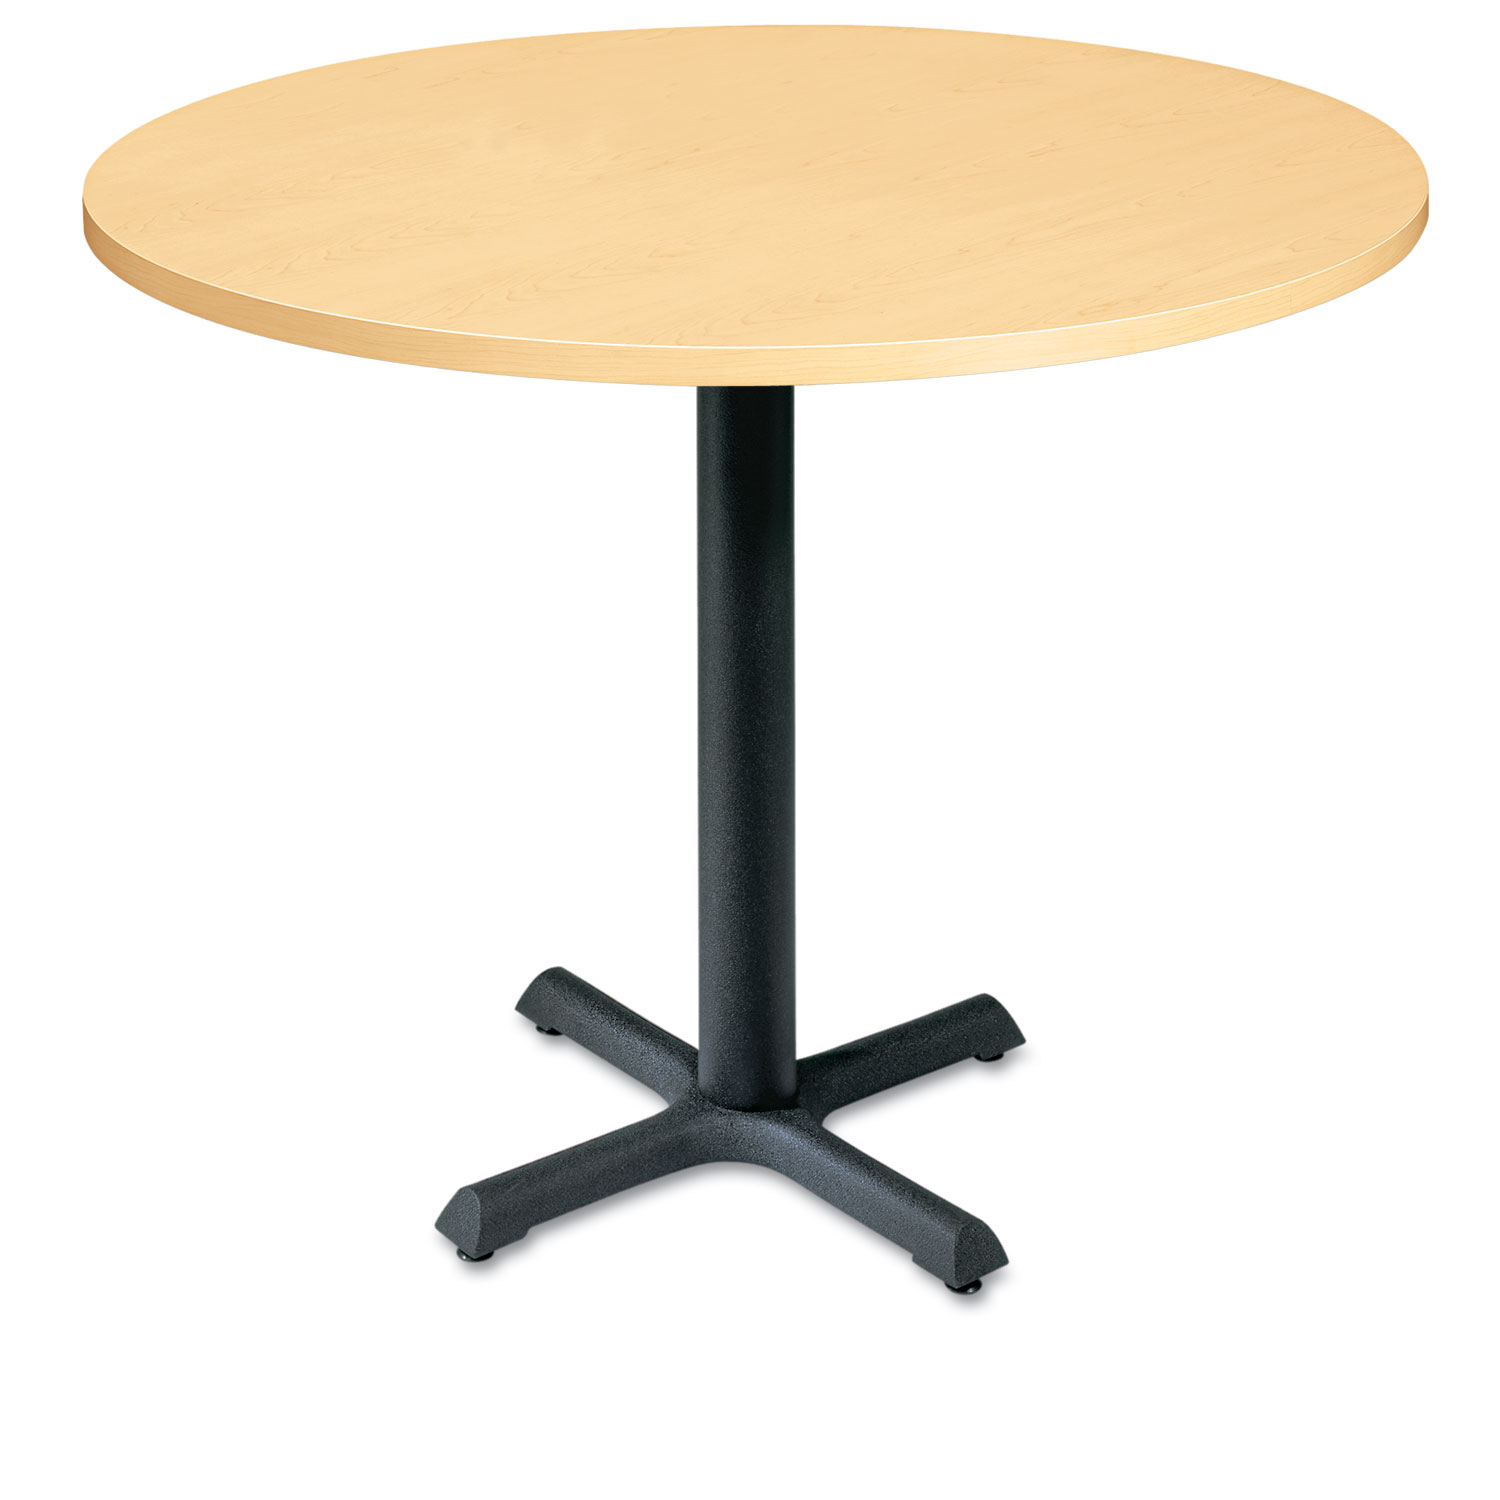 Self-Edge Round Hospitality Table Top, 36 Diameter, Natural Maple